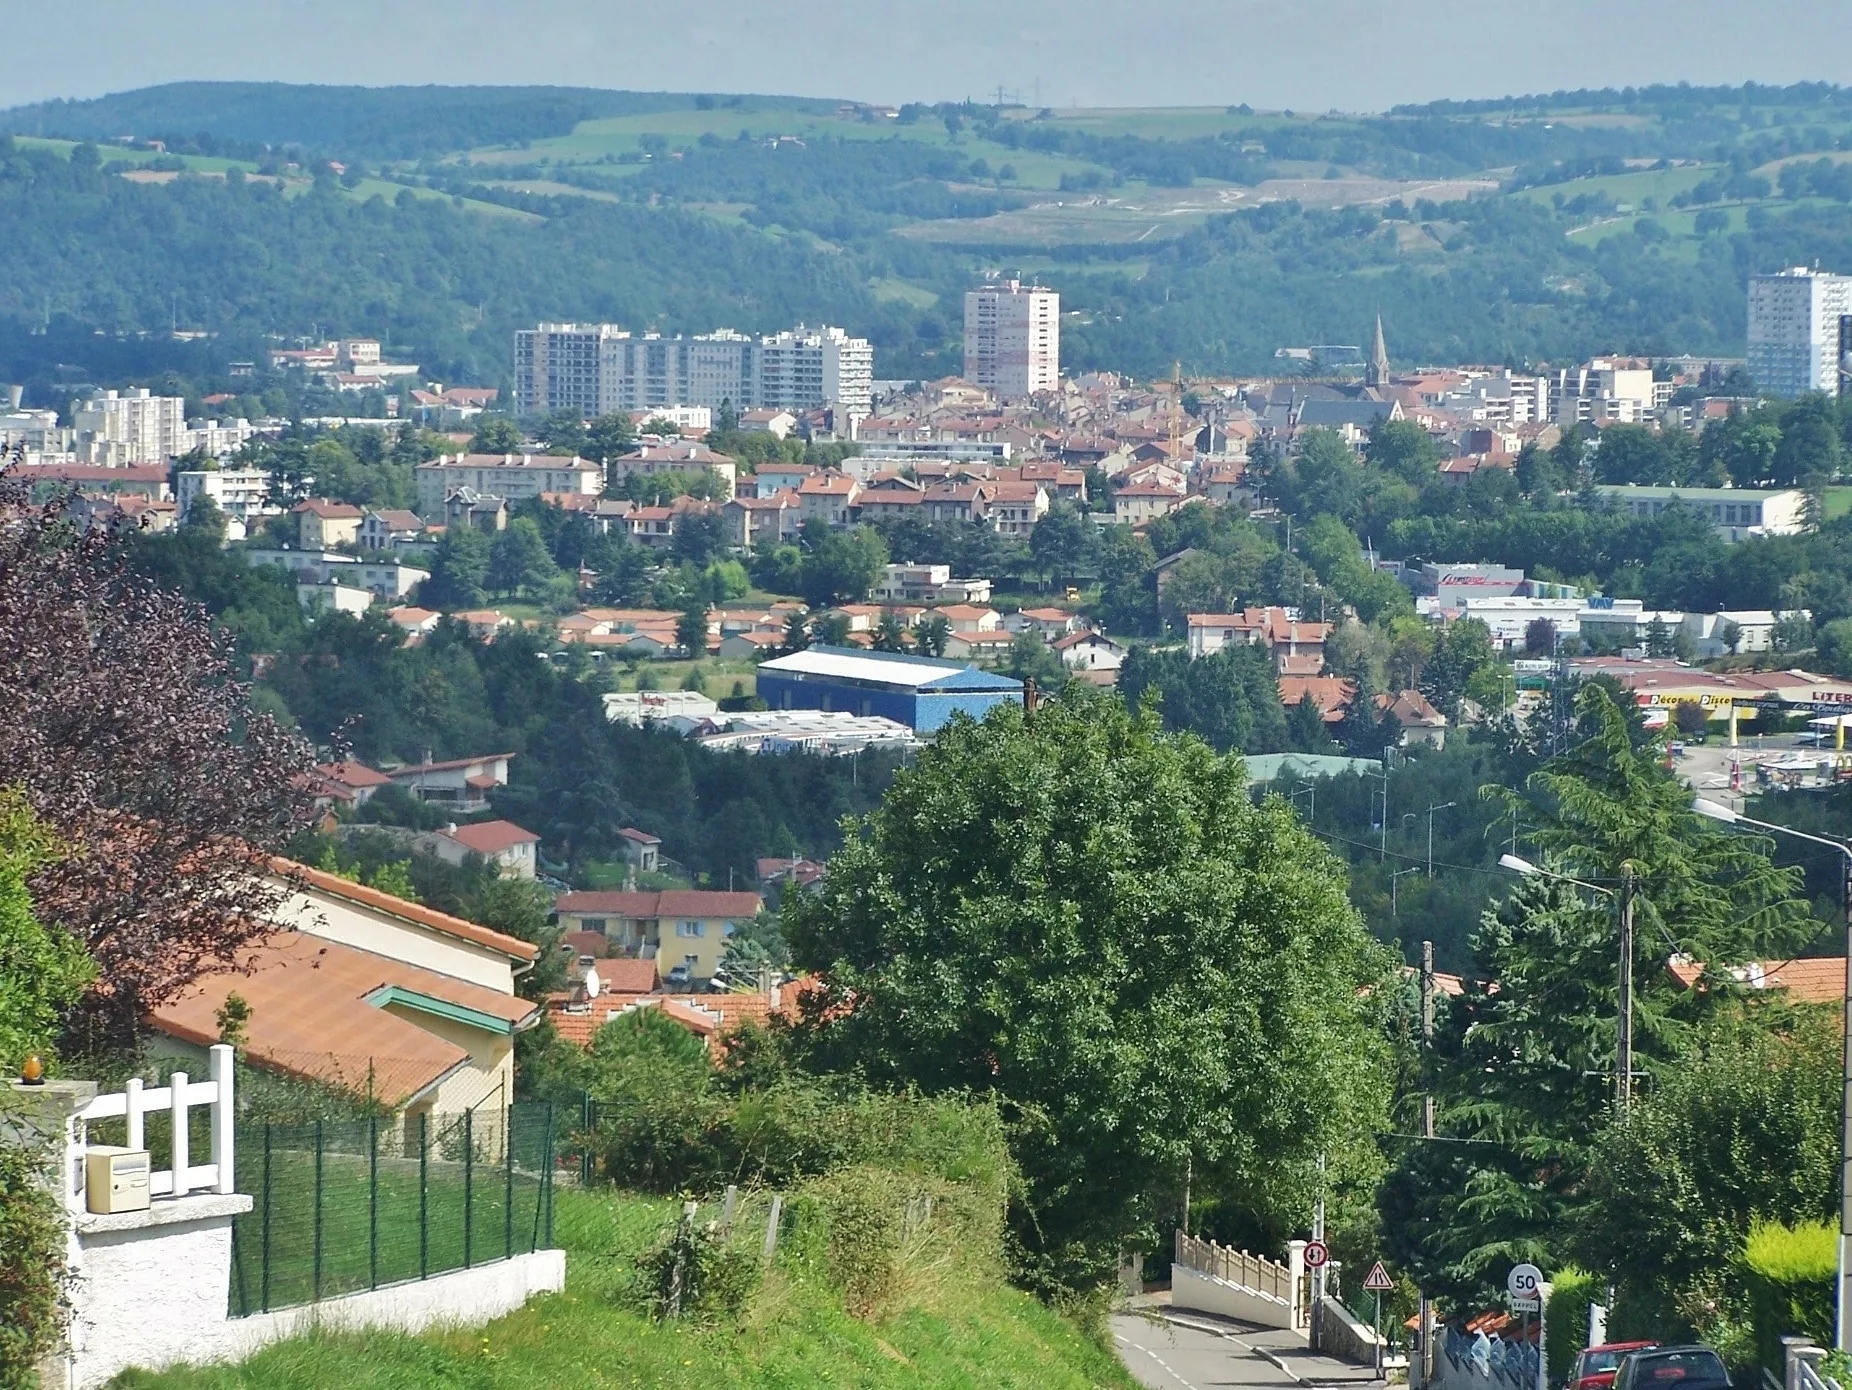 Photo showing: Wide sight of Firminy from the heights of the town, situated near Saint-Étienne in department of Loire, France.